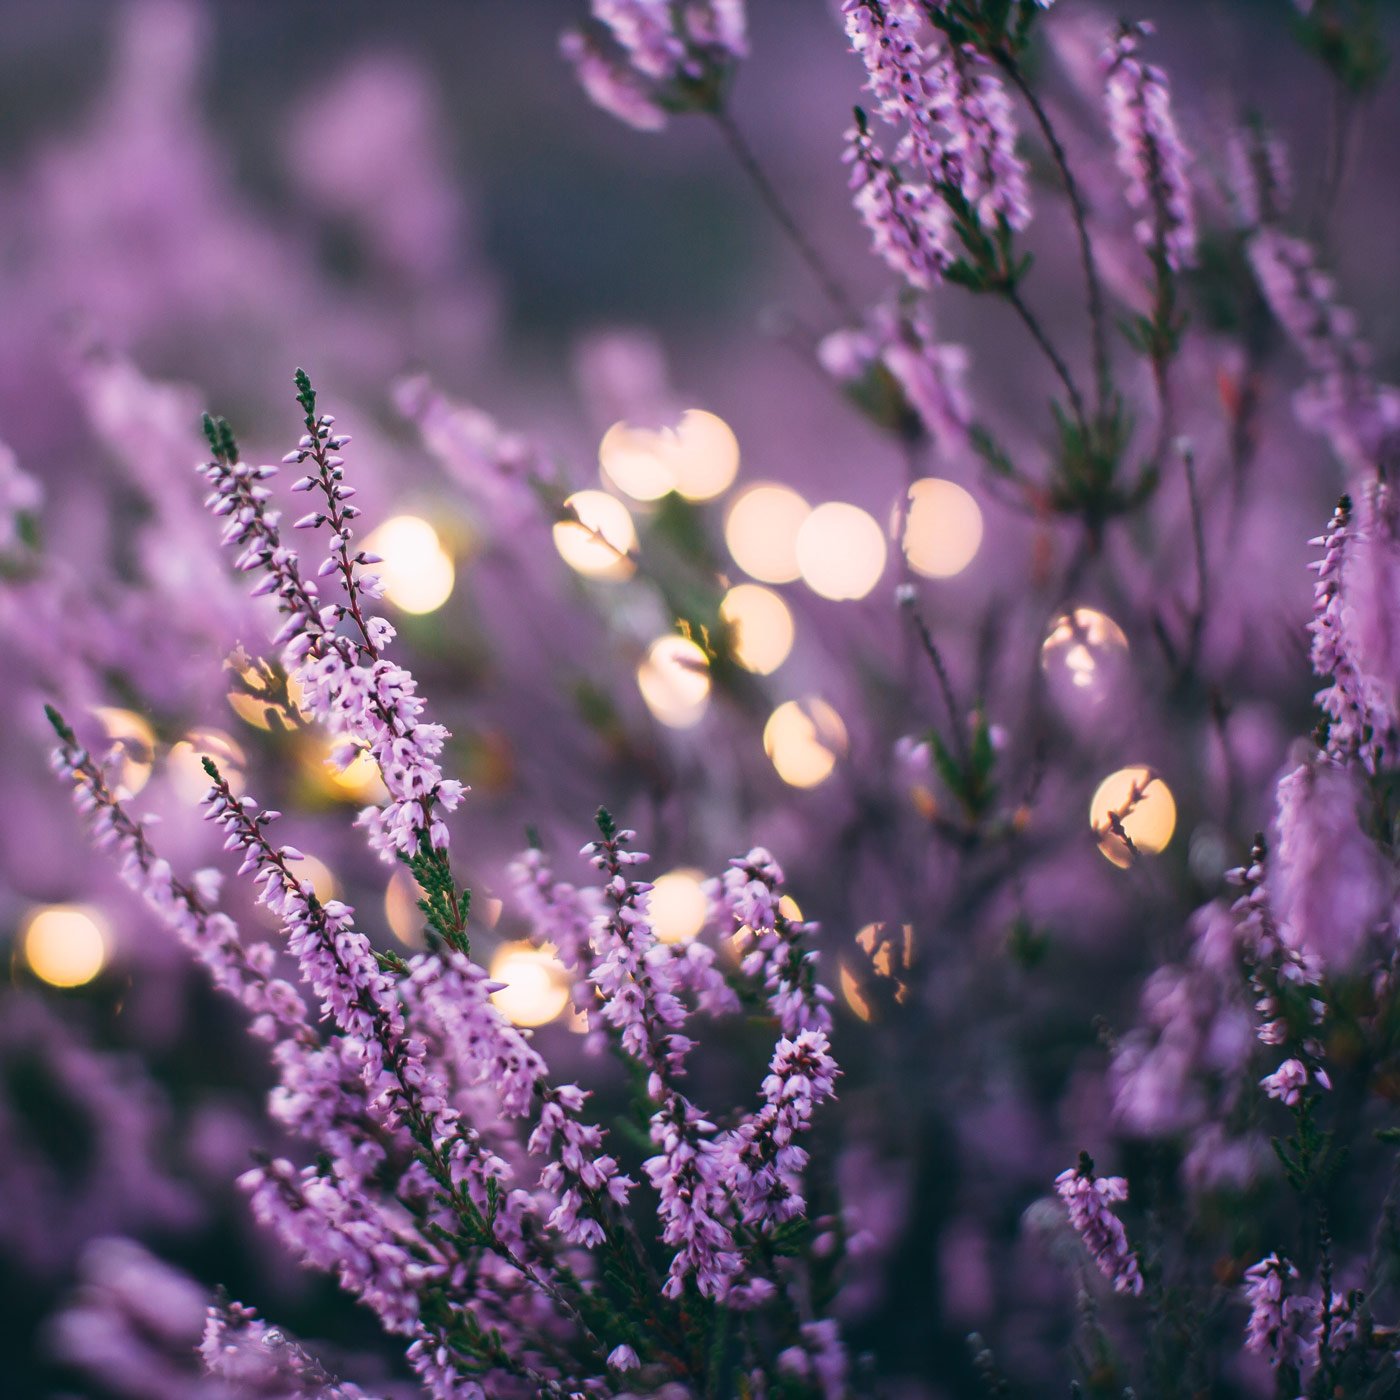 image of beautiful lavendar flowers with faint fairy lights behind